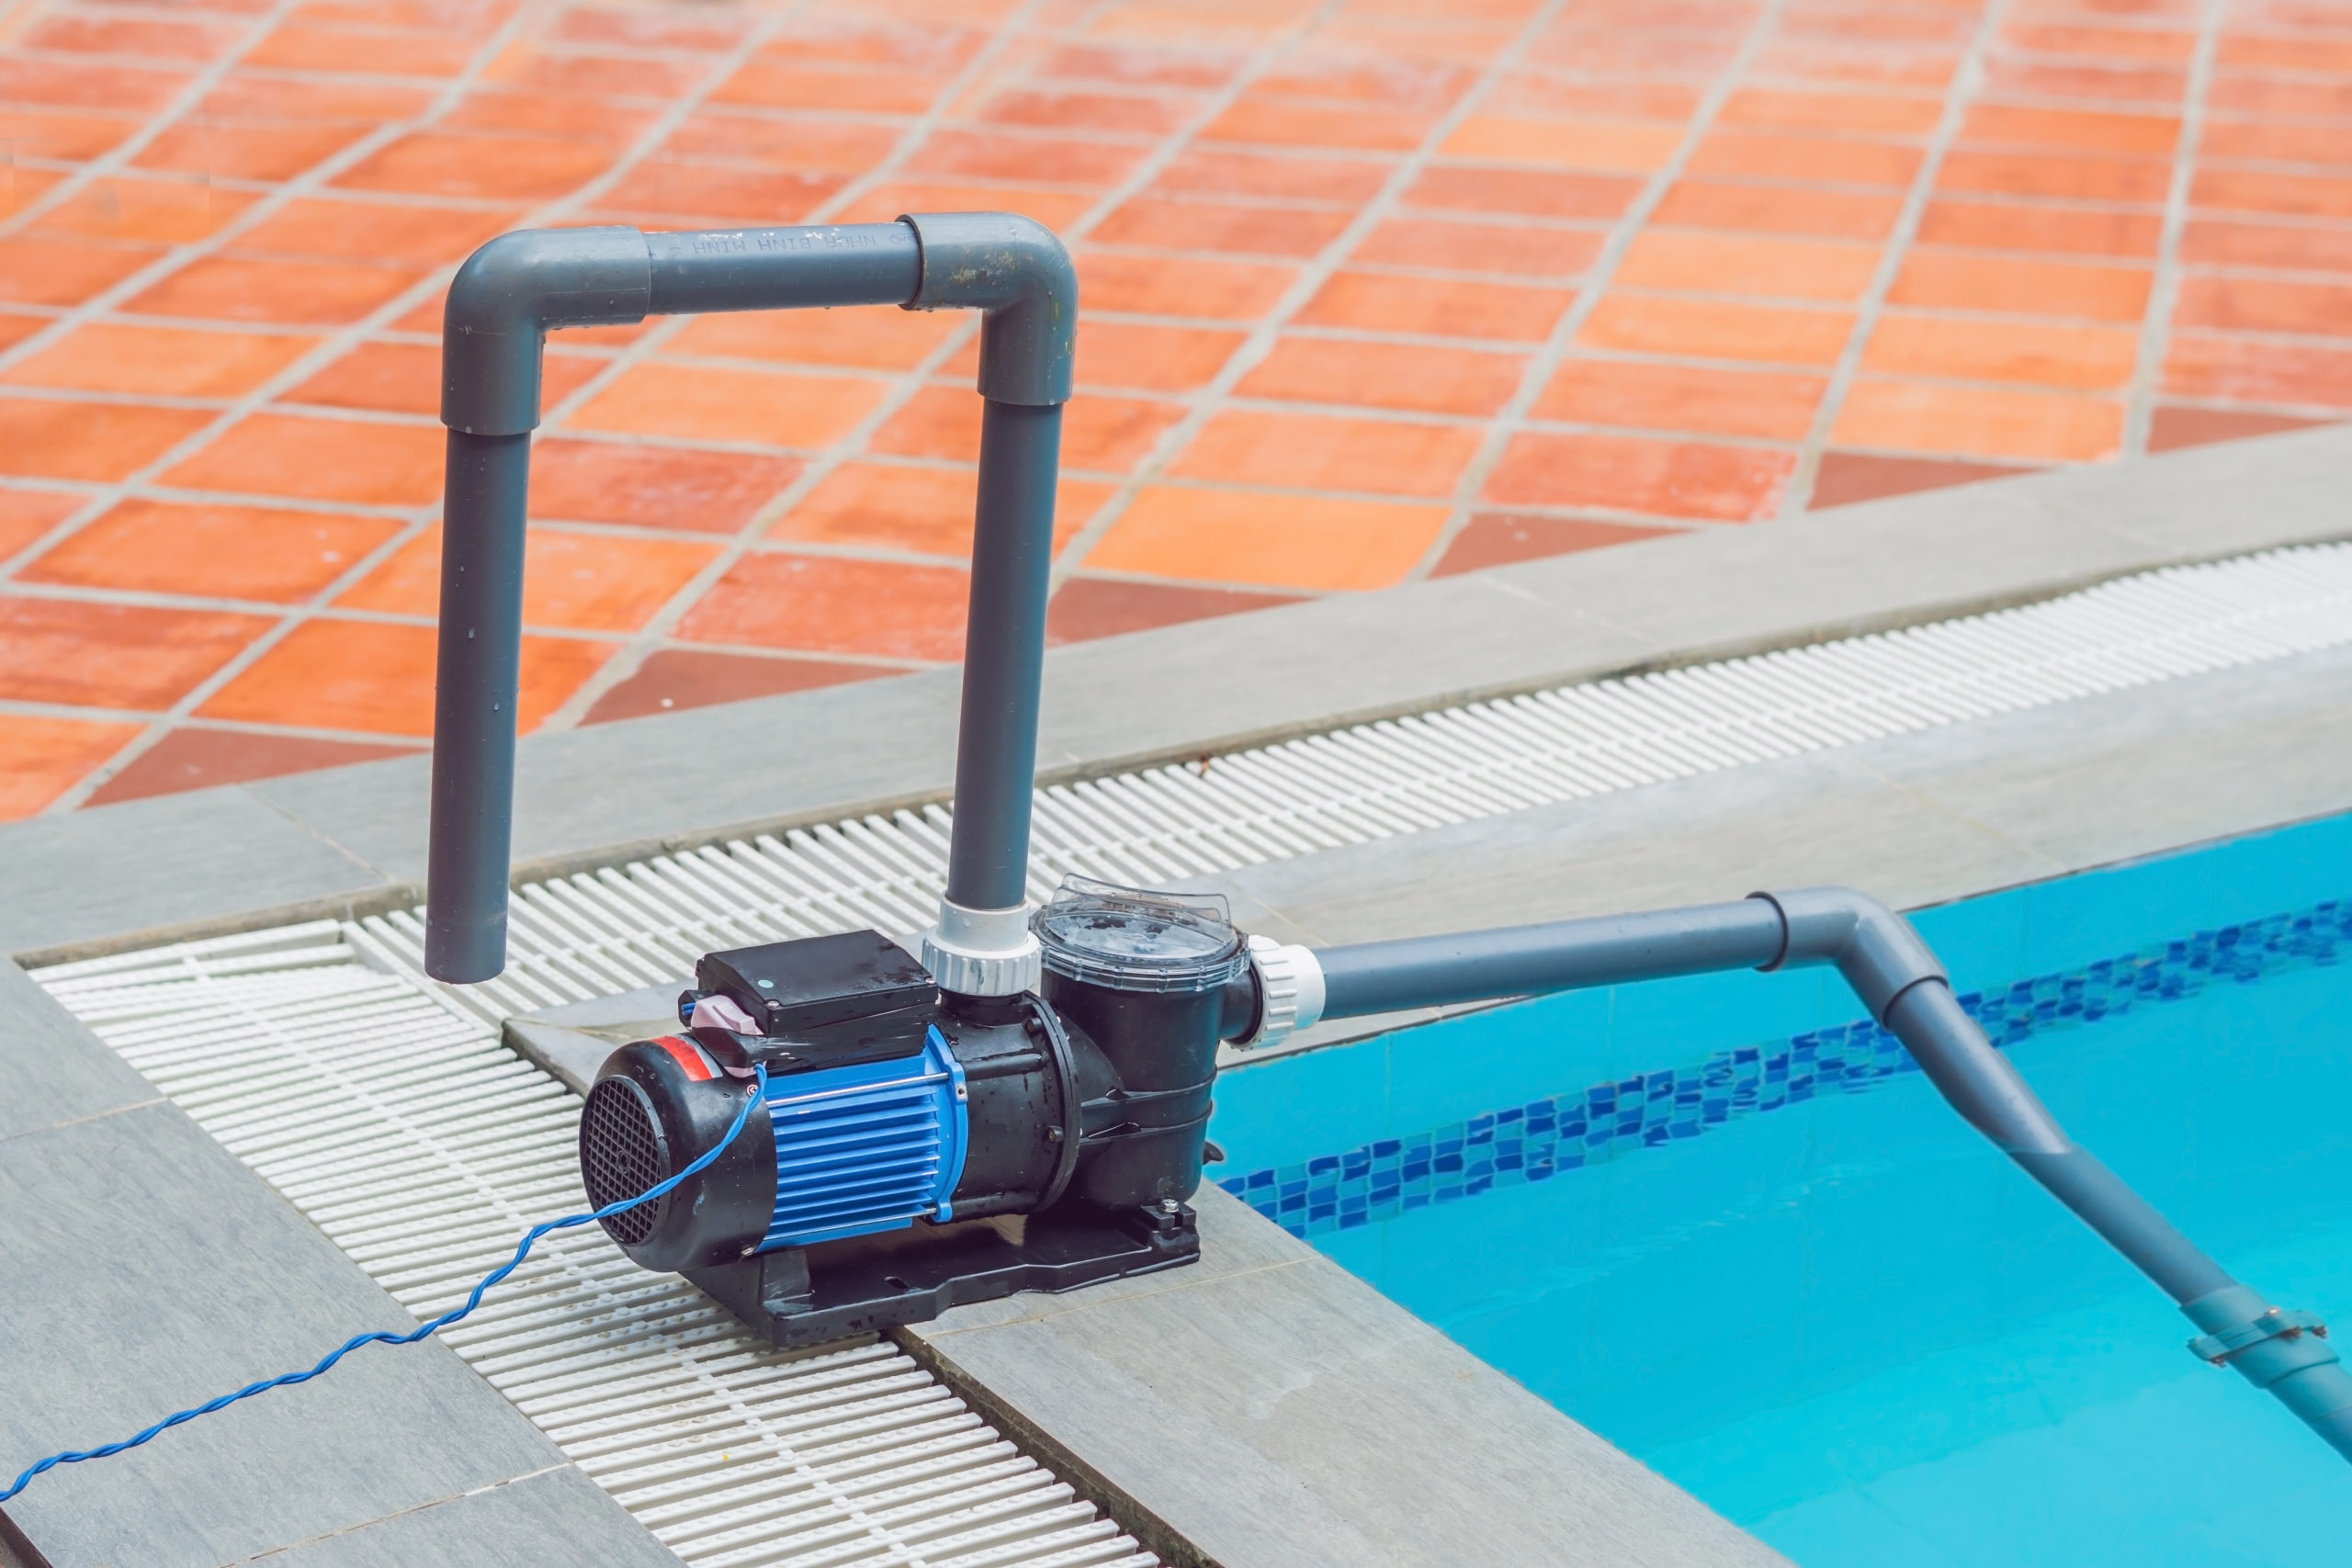 A pool cleaning tool designed for maintaining the cleanliness of a swimming pool.